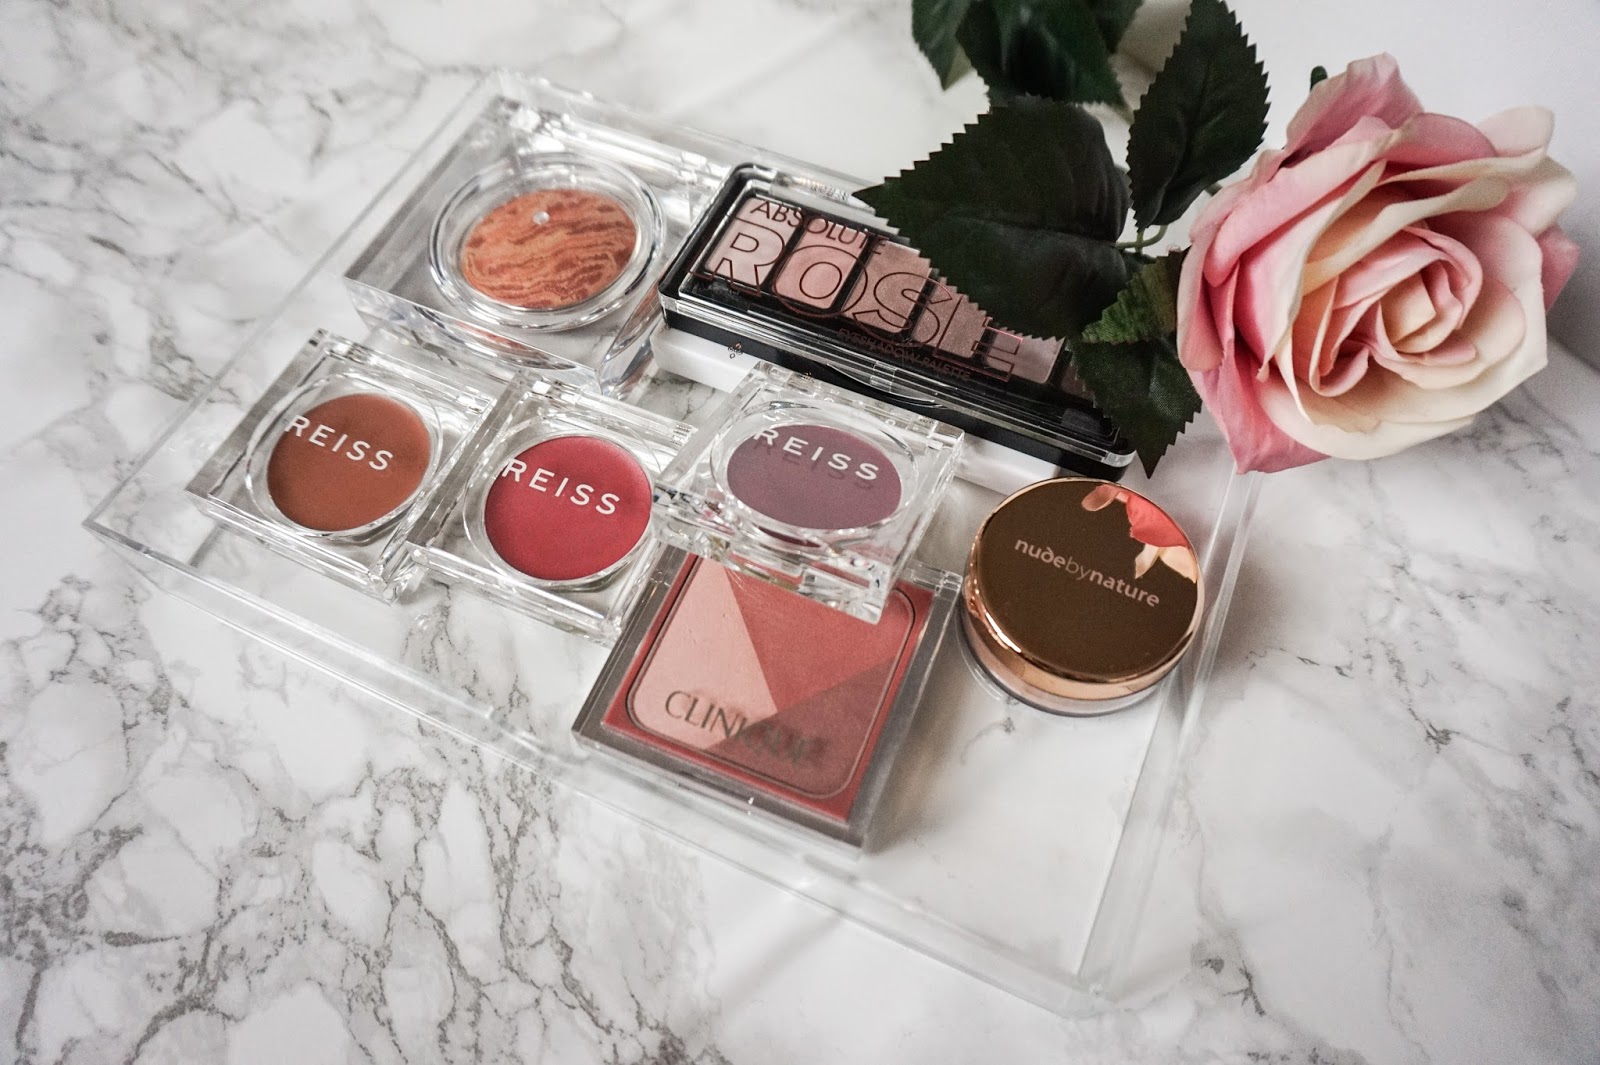 Storage tray with reiss, clinique, nude by nature and catrice makeup